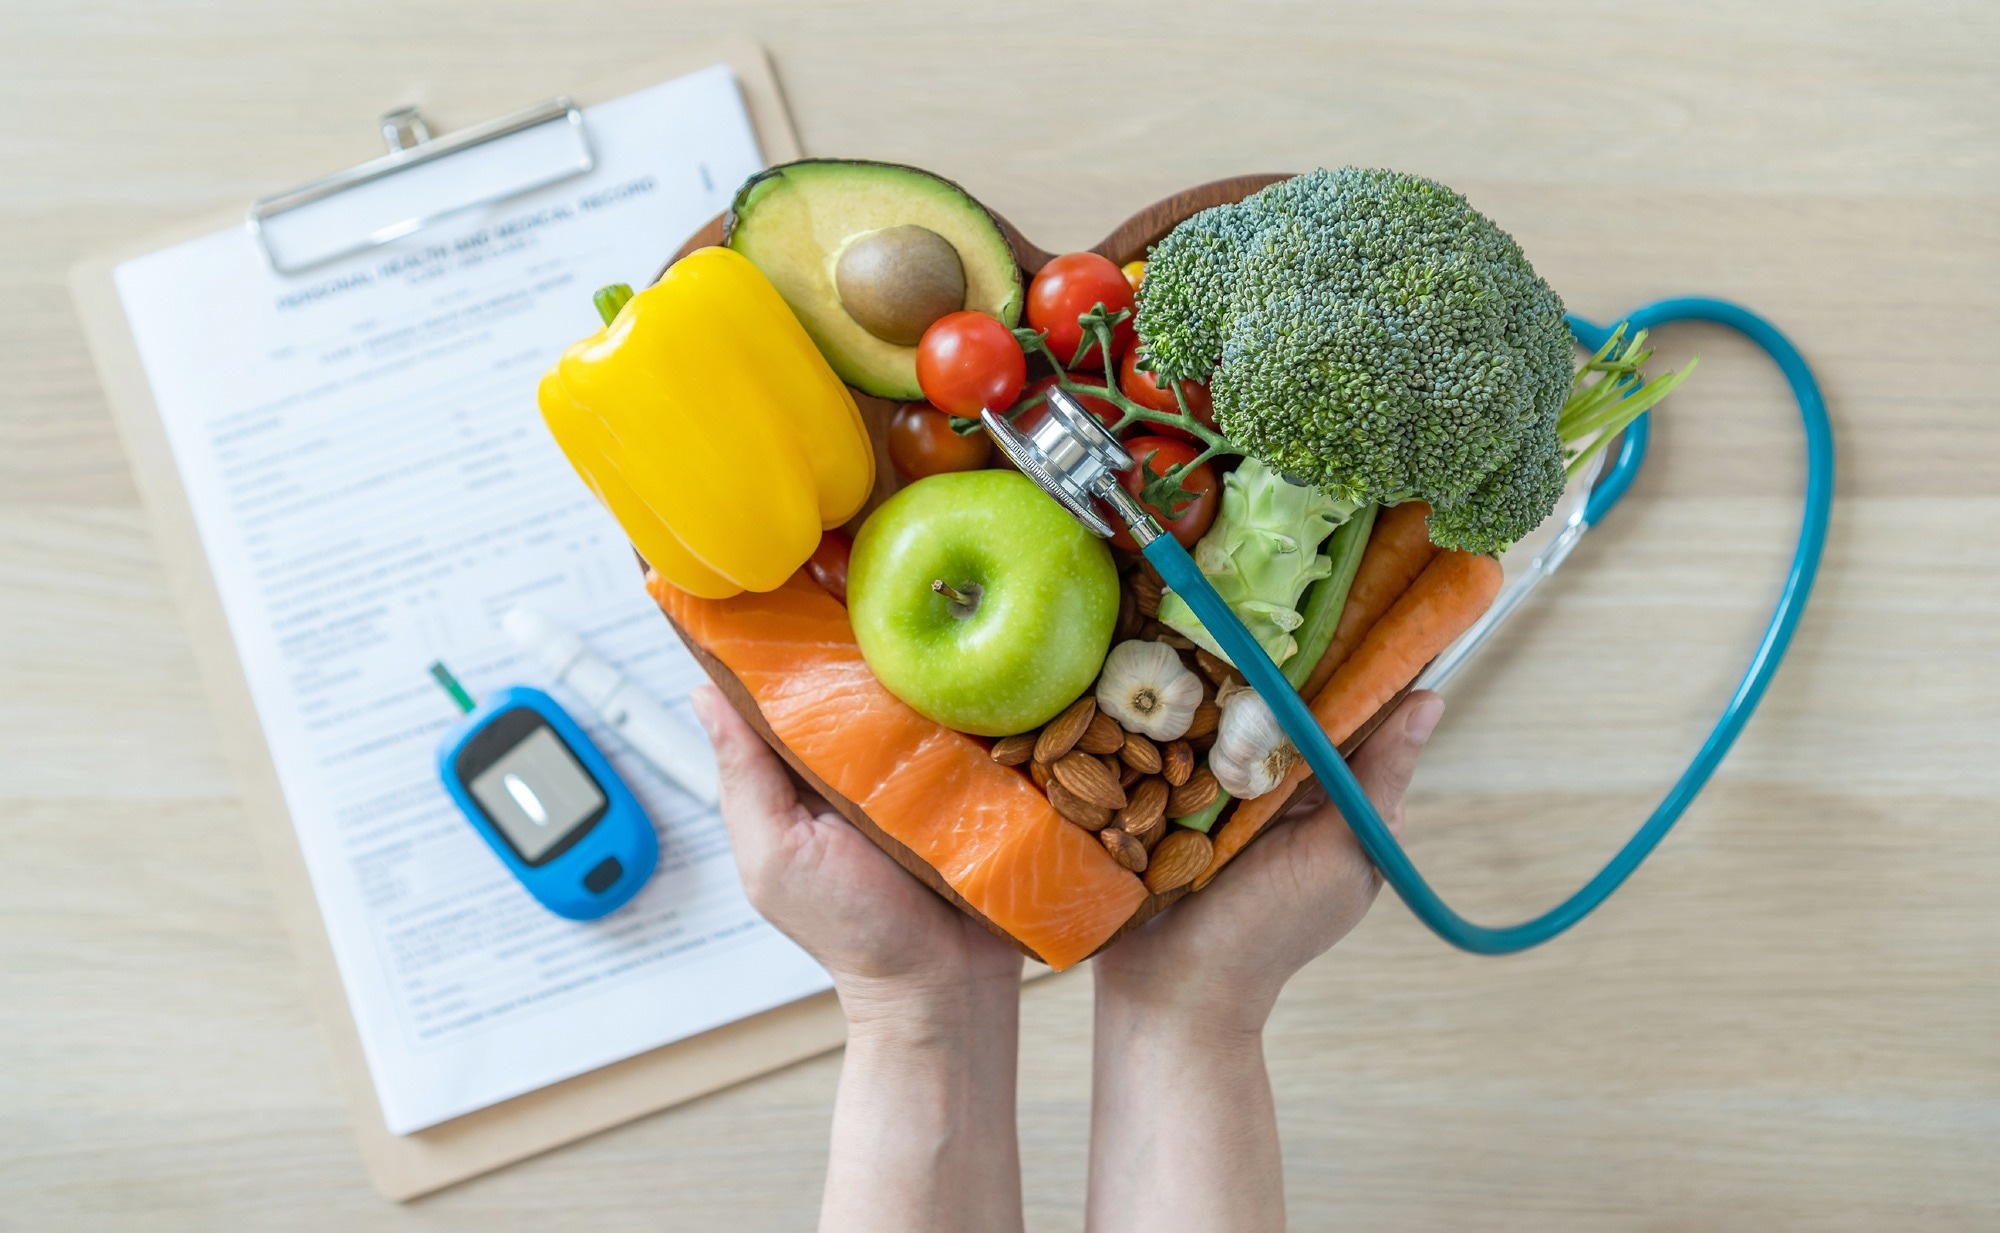 Study: Does a Ketogenic Diet Have a Place Within Diabetes Clinical Practice? Review of Current Evidence and Controversies. Image Credit: Chinnapong / Shutterstock